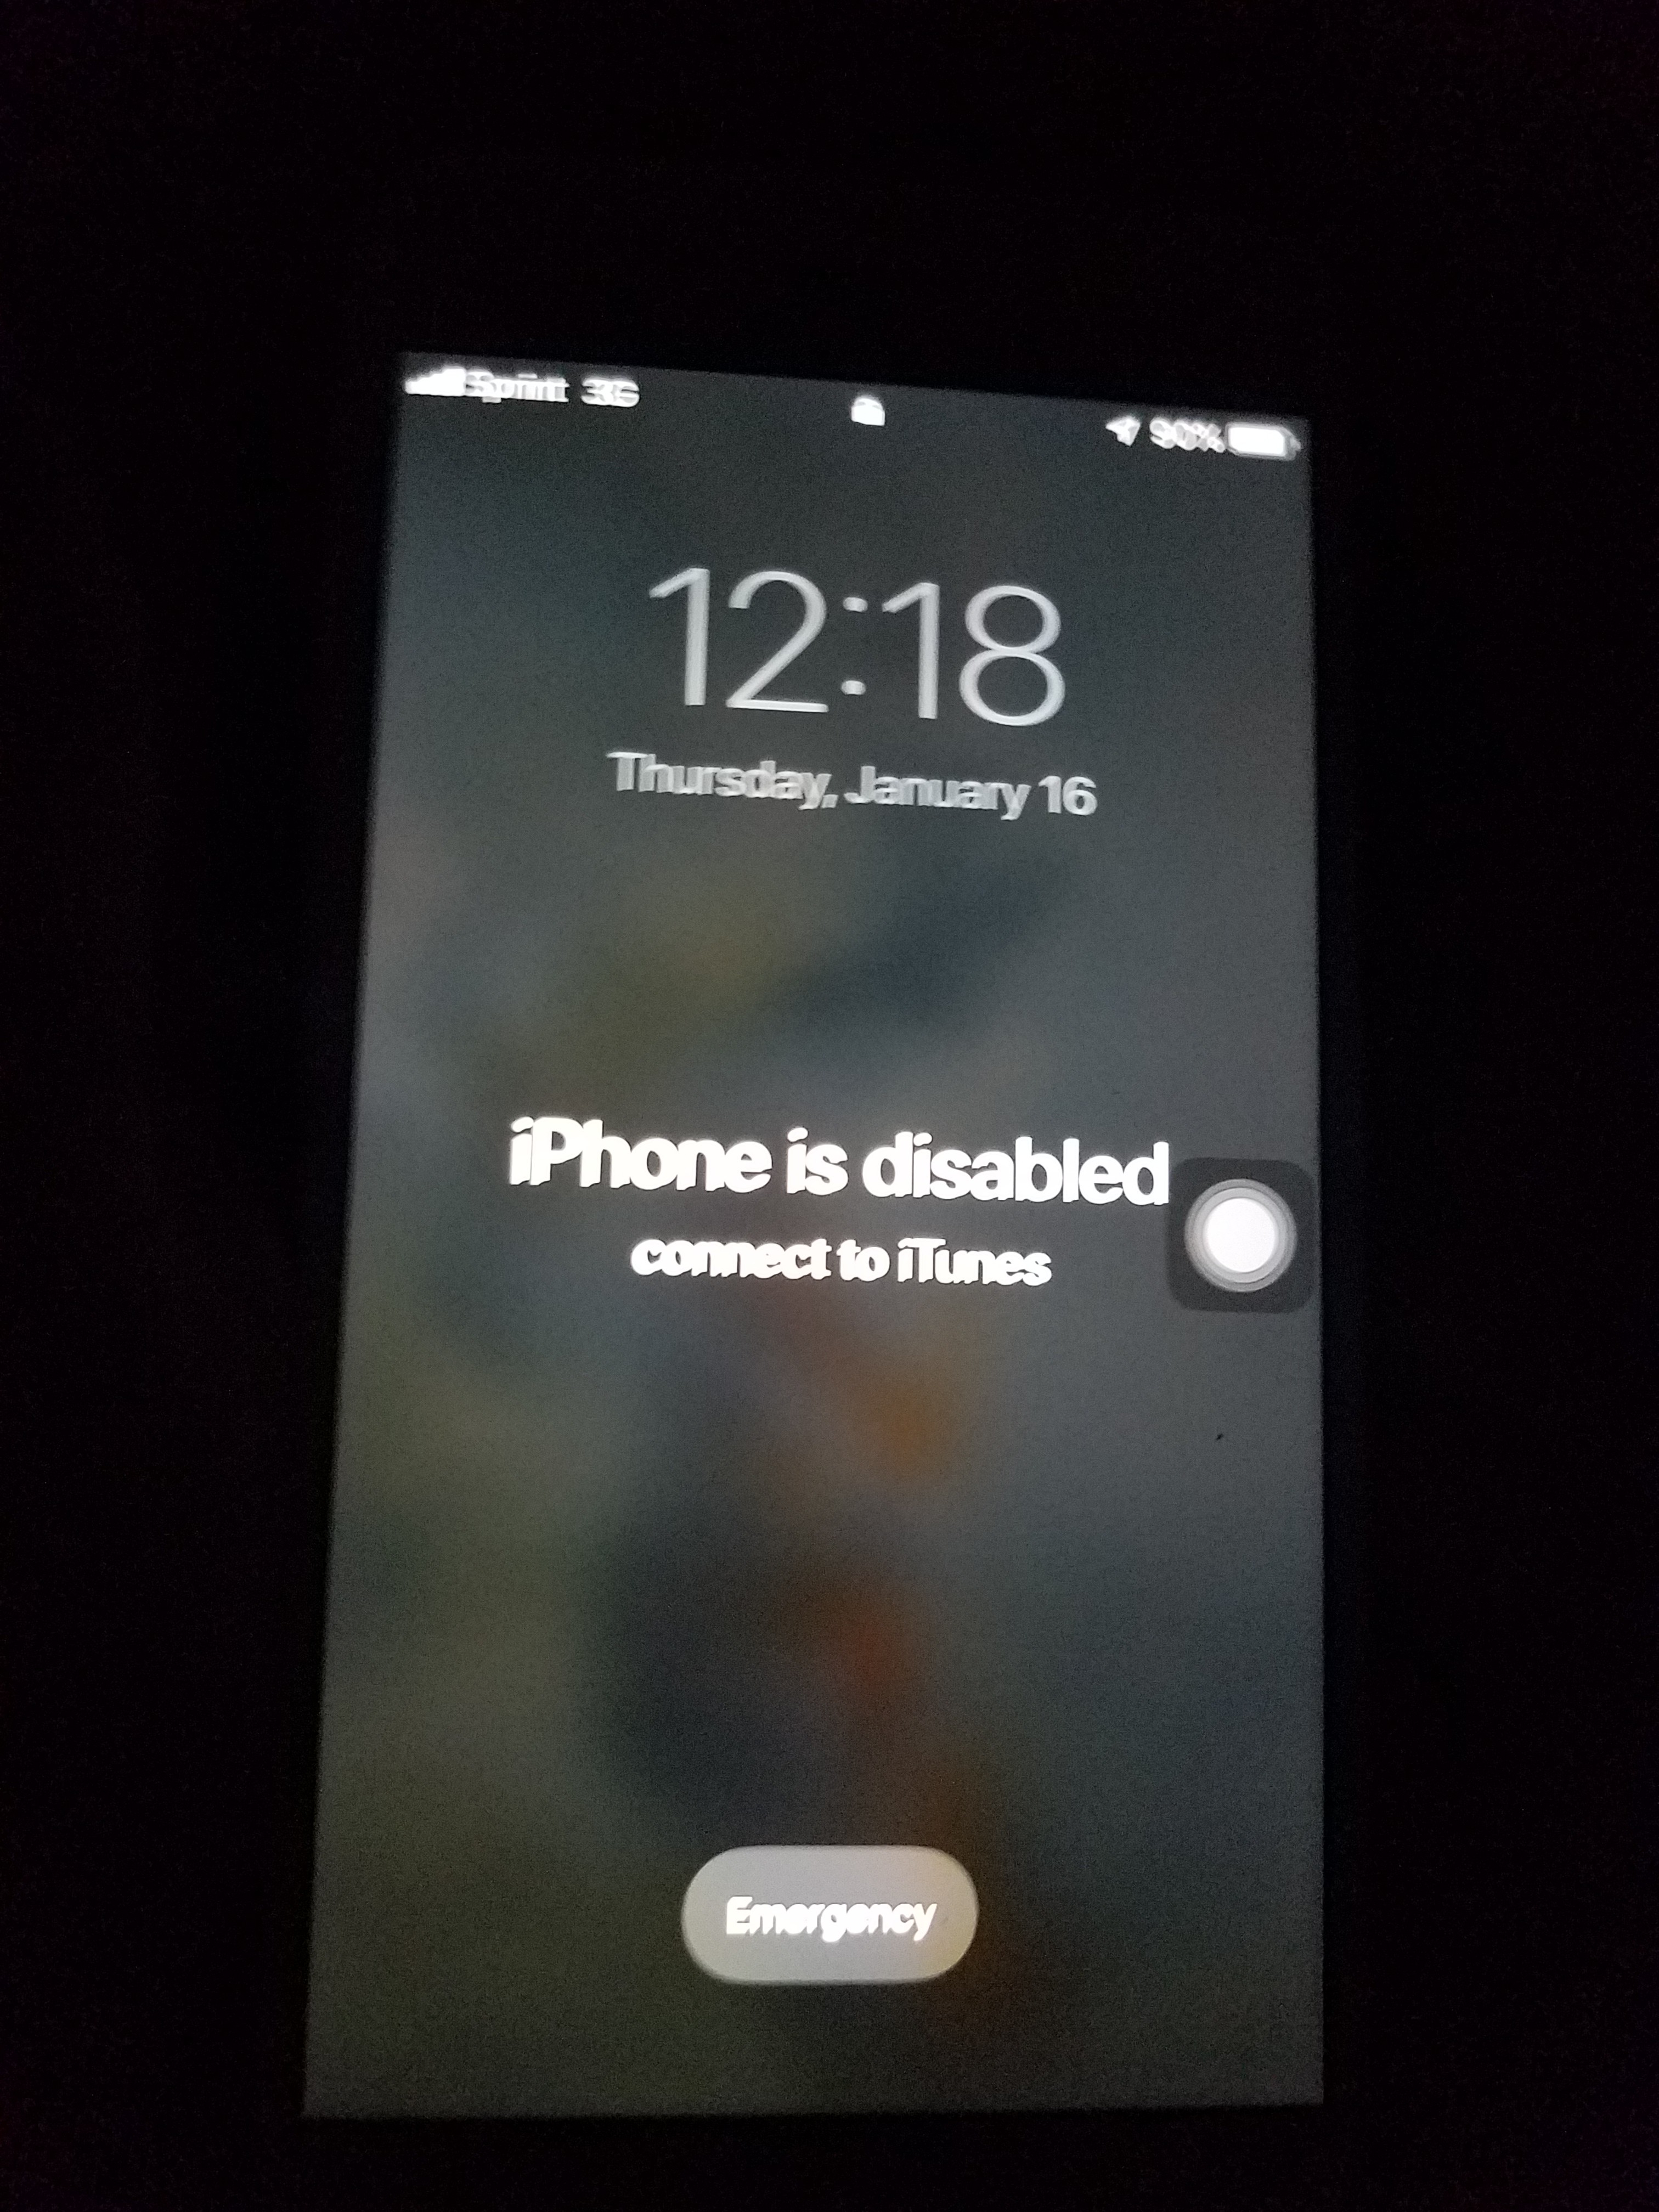 Cant restore iphone 29 plus(disabled conne - Apple Community